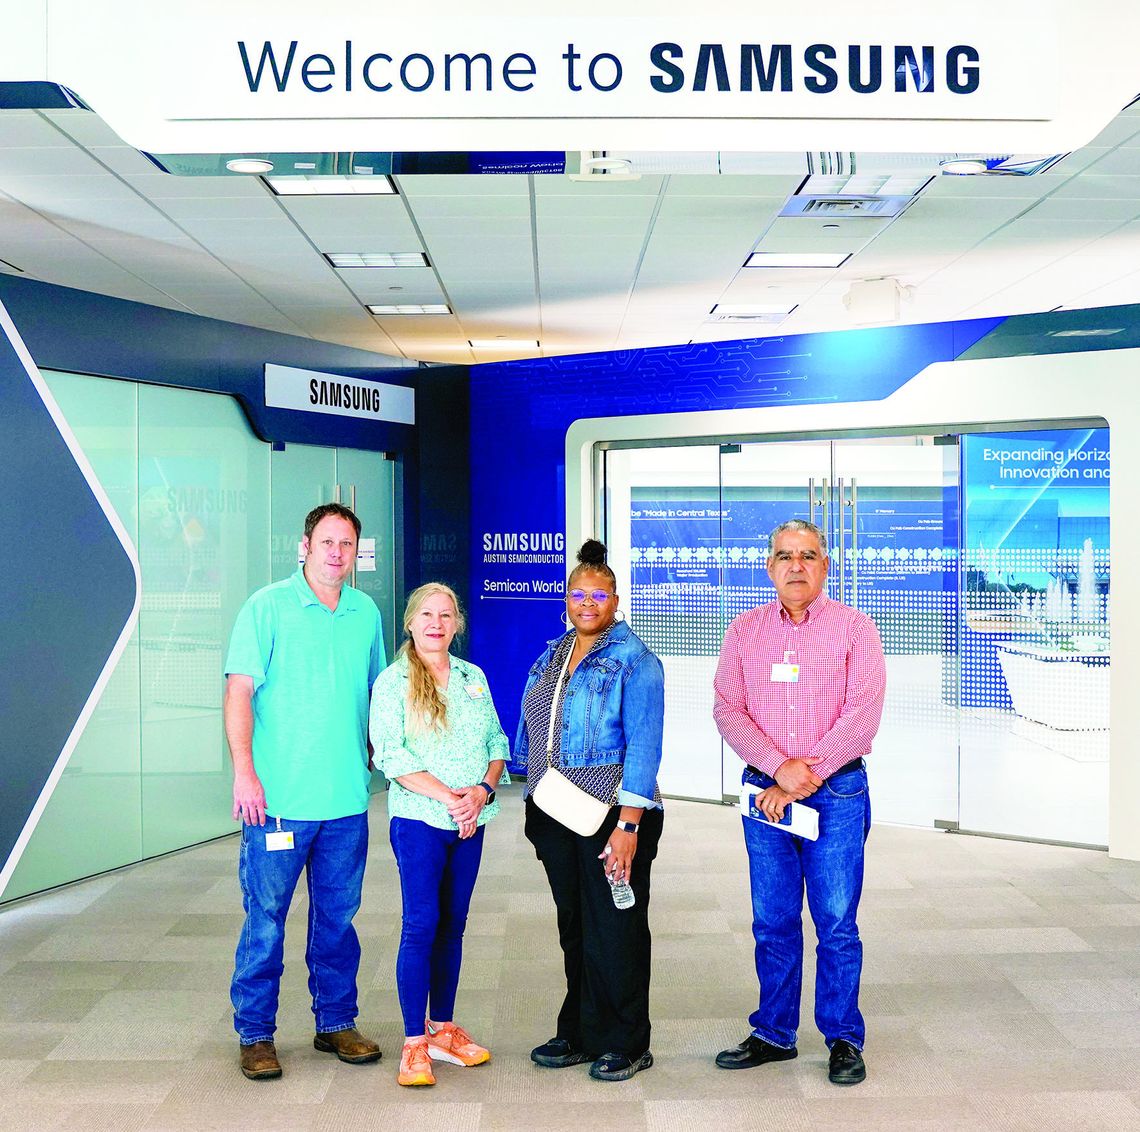 Marvin Croft and Amy Heffernan, two Taylor High School teachers, posed with two teachers from Austin ISD during last week’s externship program. Photo courtesy of Samsung Austin Semiconductor.